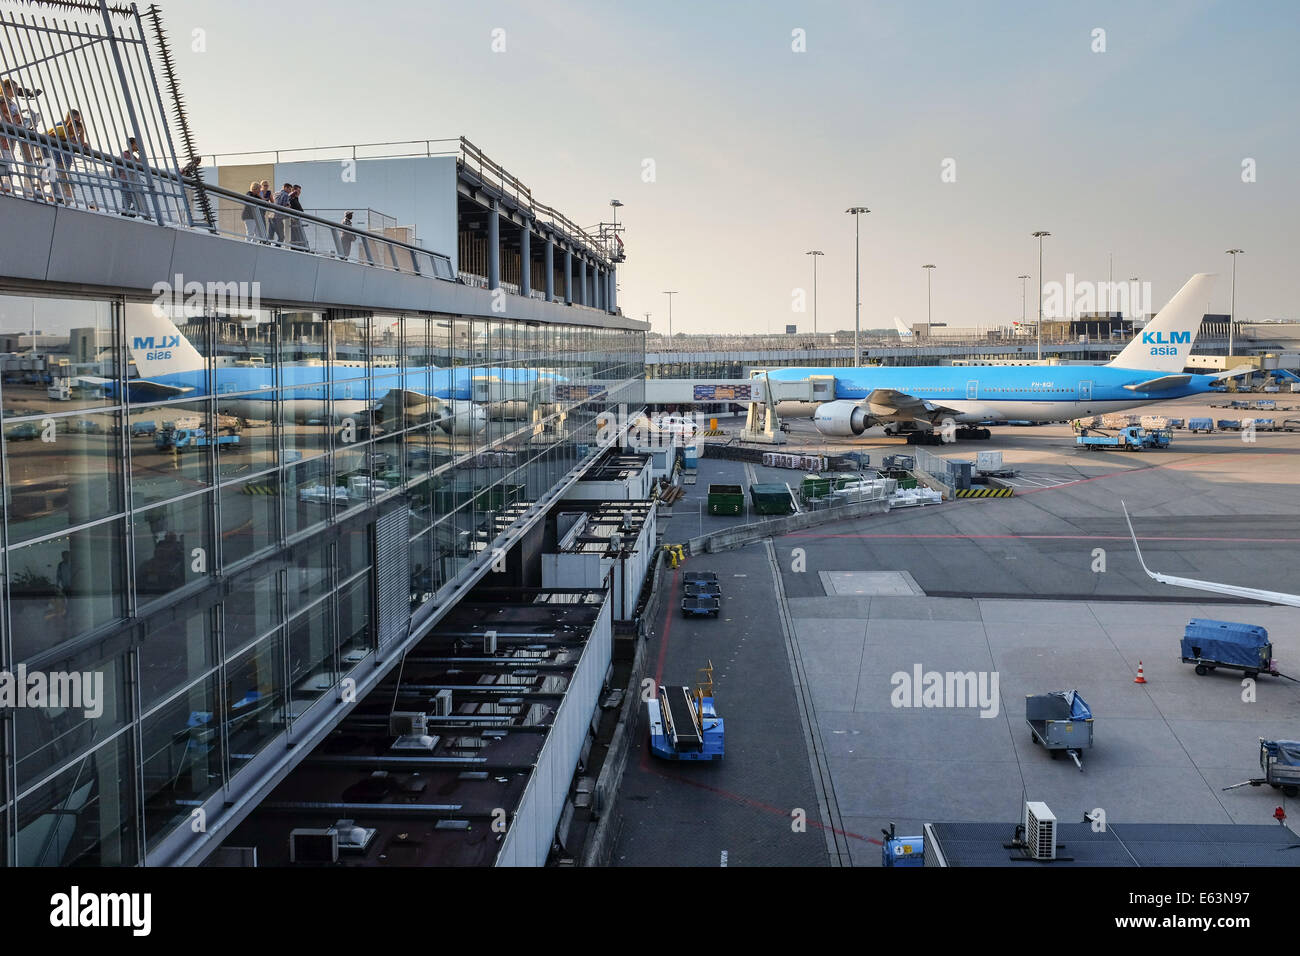 A KLM airplane is stopped in Schiphol Airport in Amsterdam, Holland, Europe Stock Photo